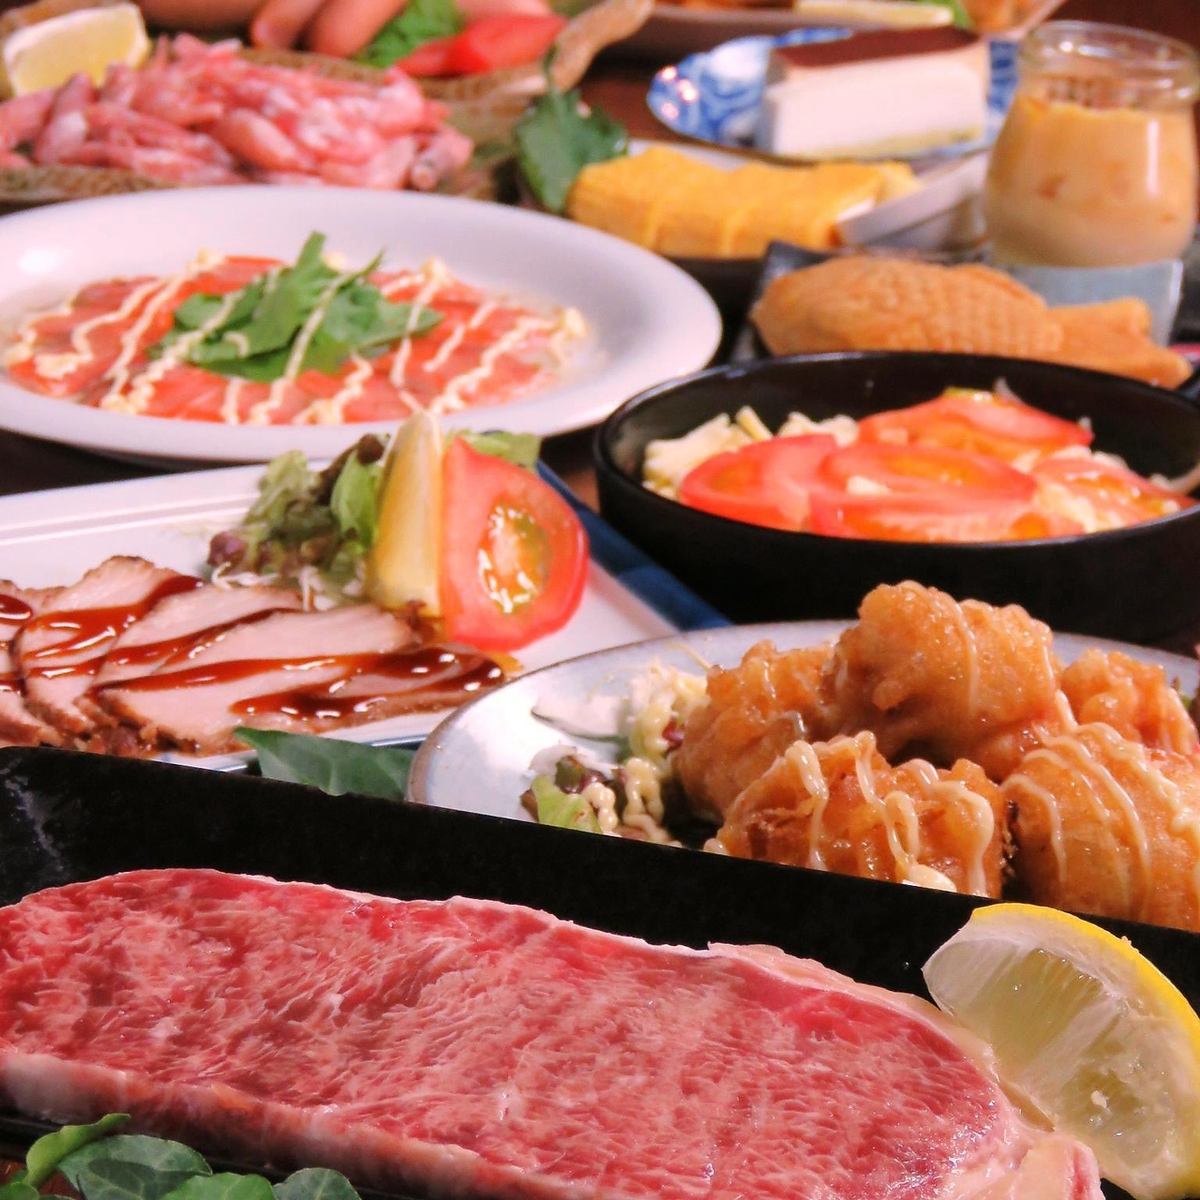 All-you-can-eat and drink for 3 hours for 3,850 yen (included); 60 dishes and 70 drinks totaling 130 varieties